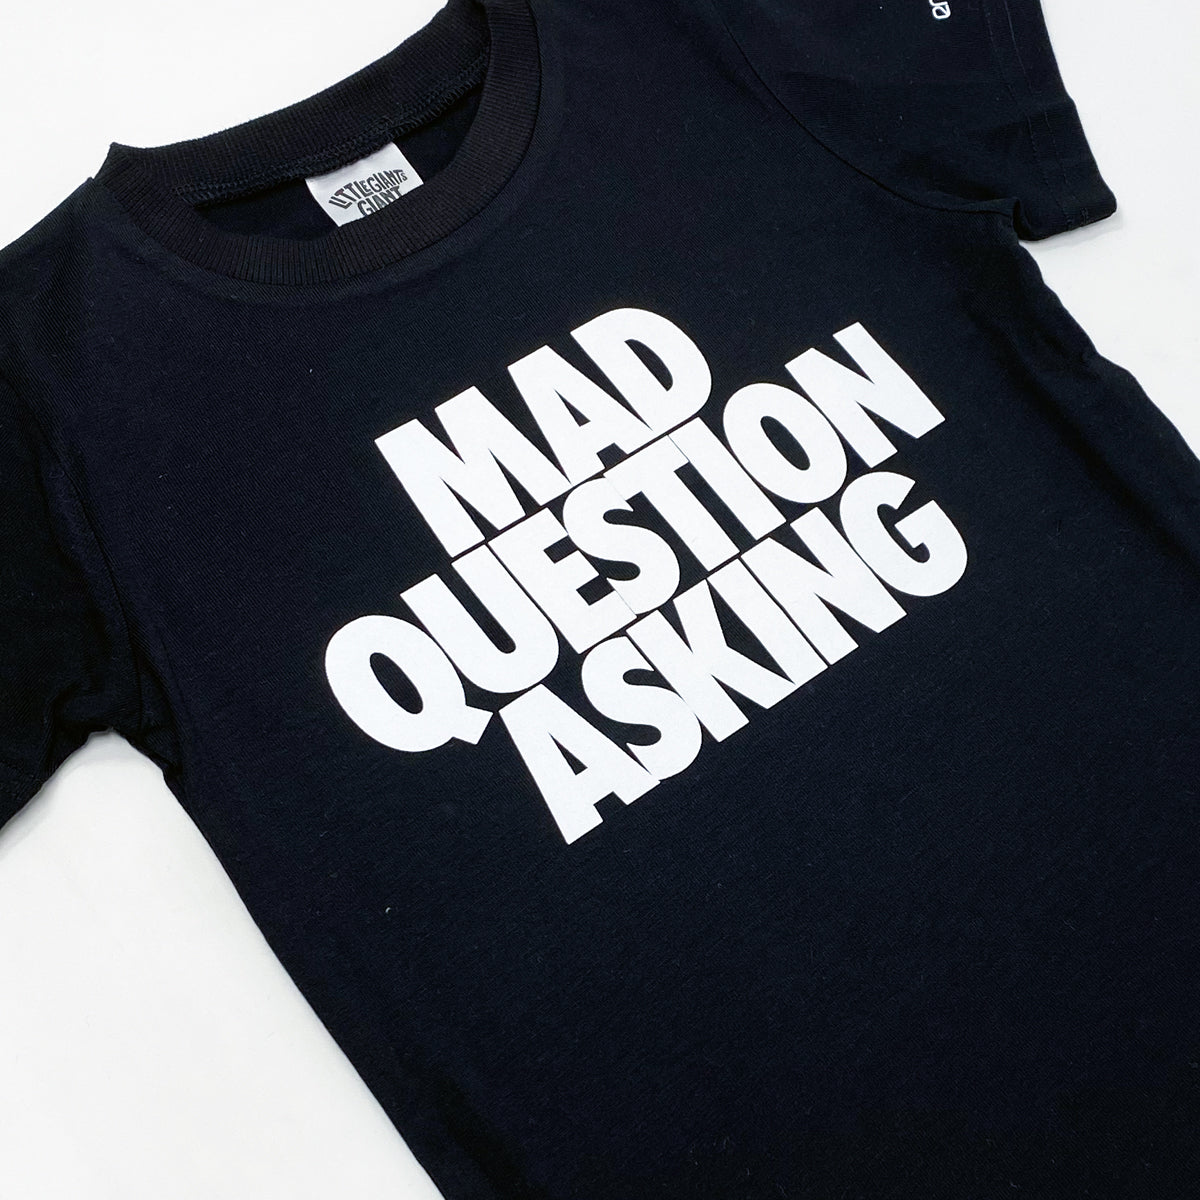 Mad Question Asking T-shirt (Black)